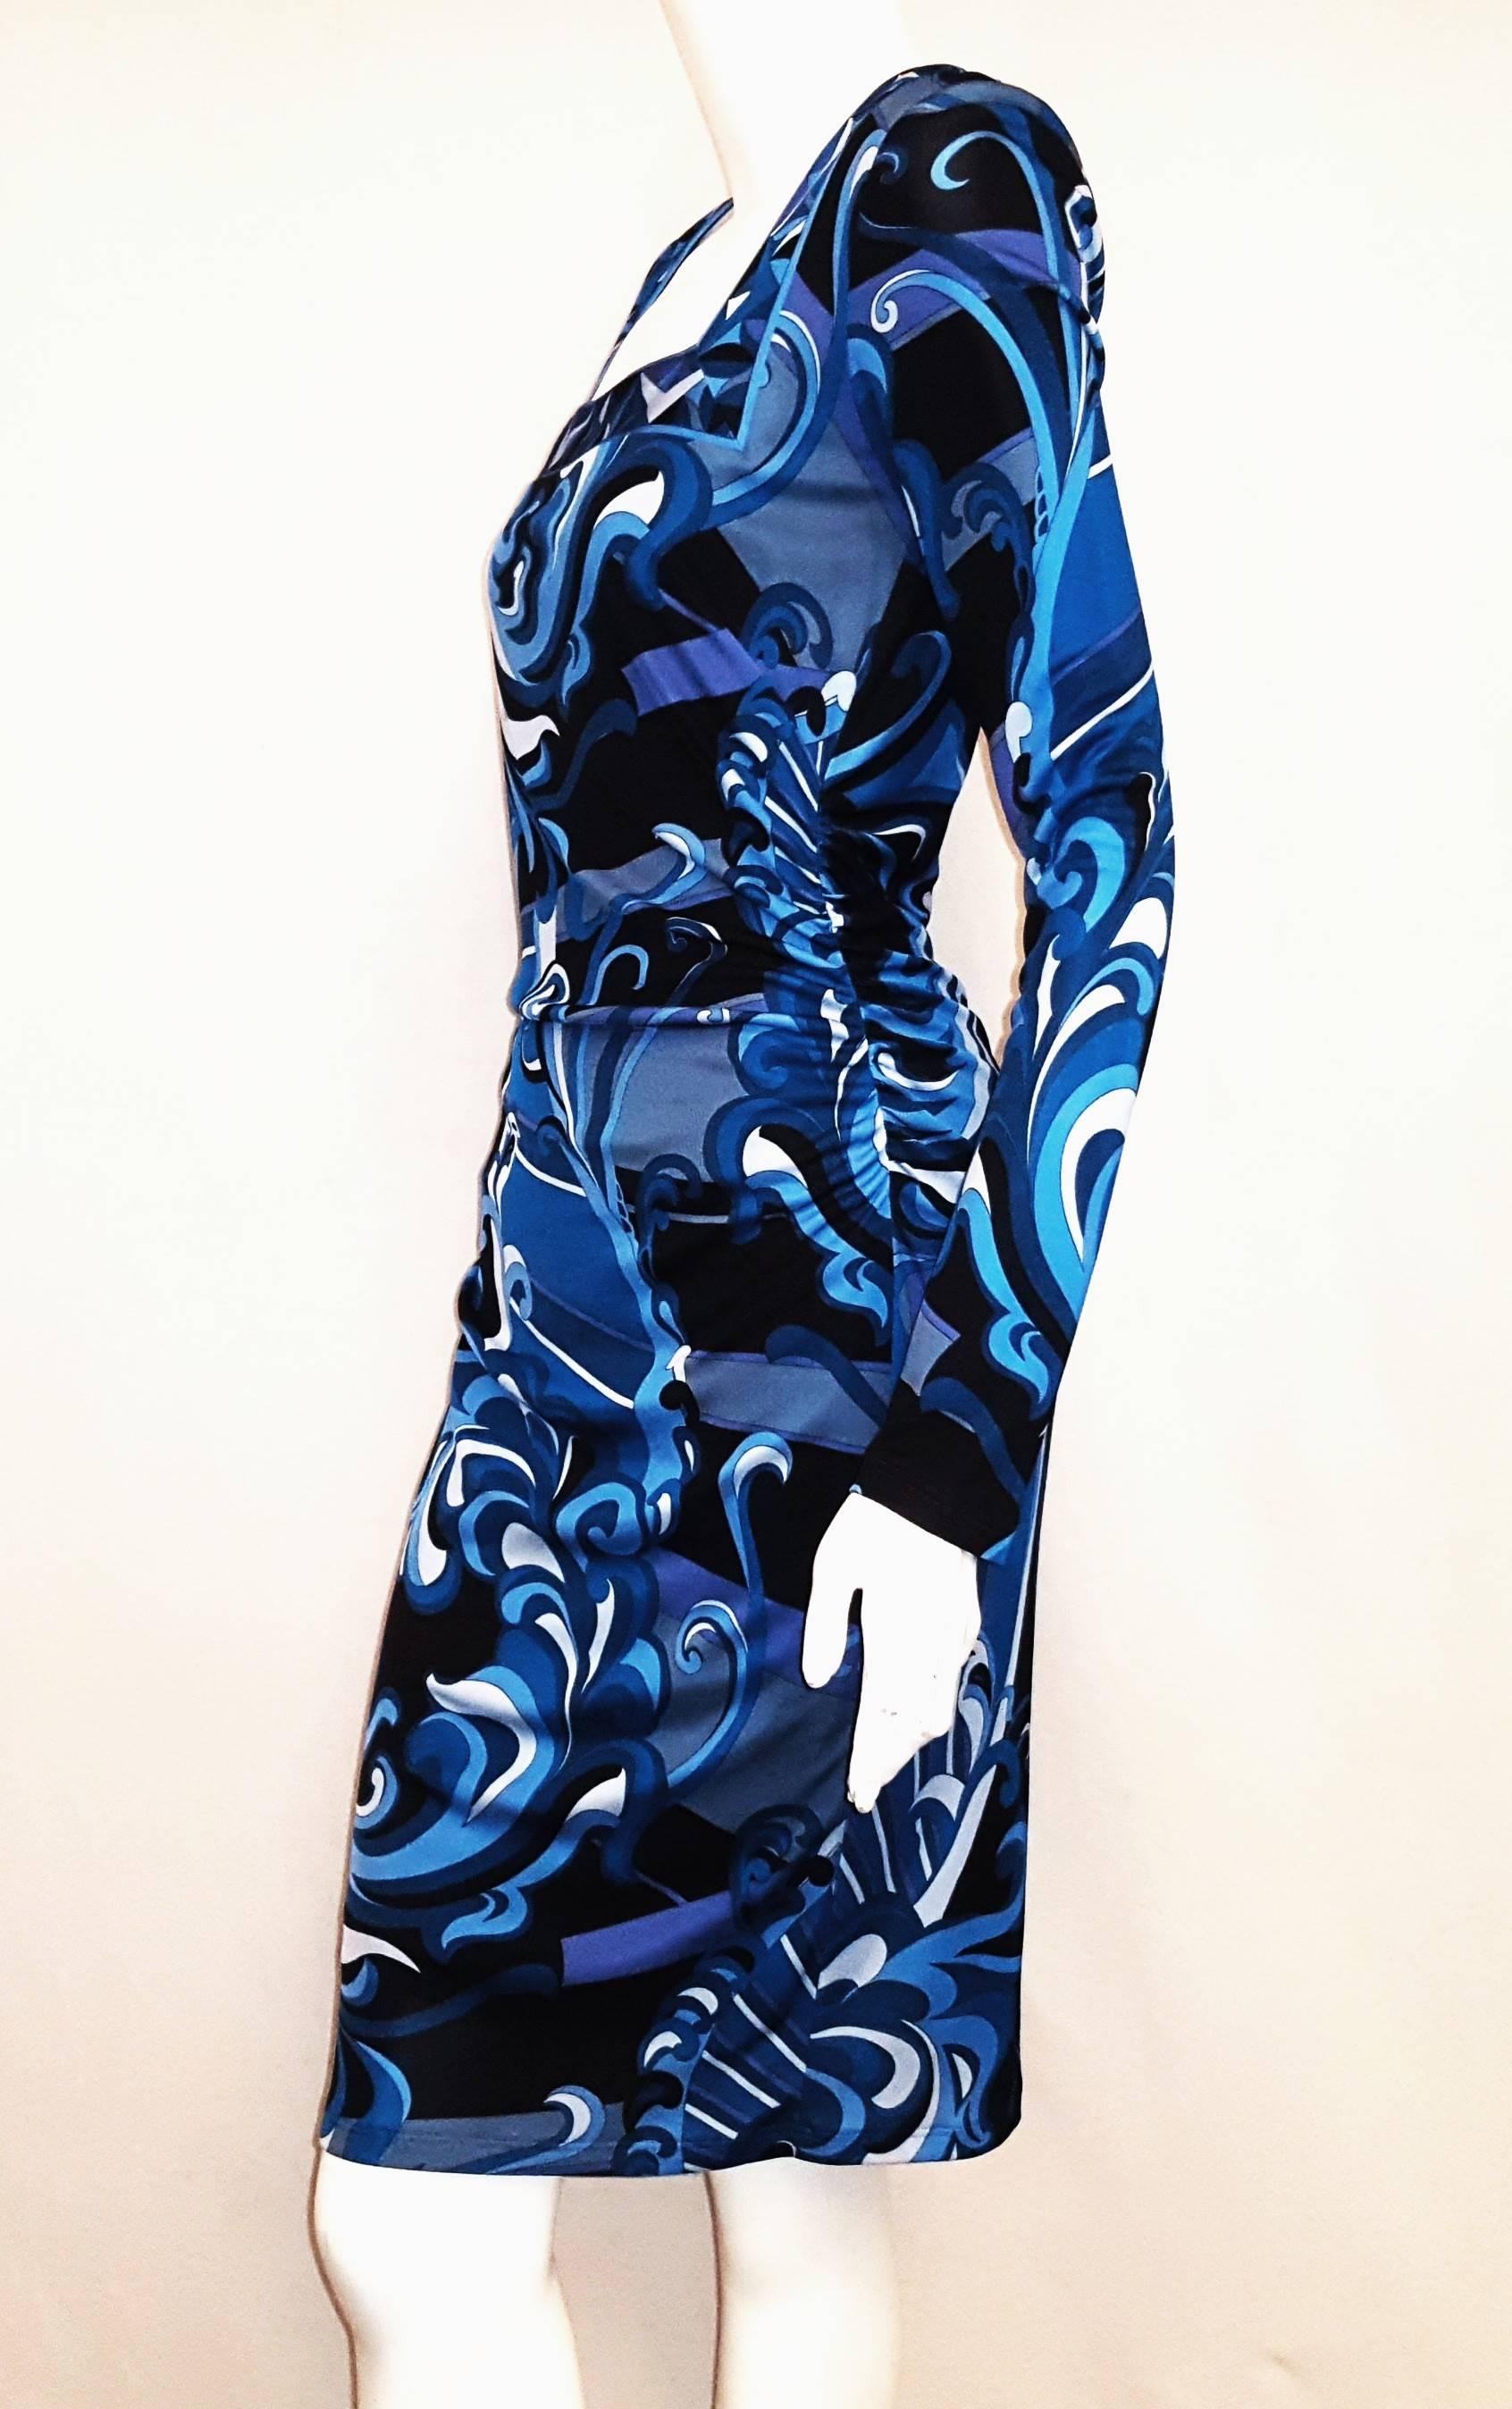 Emilio Pucci Blue Tones Gathered Long Sleeve Dress In Excellent Condition For Sale In Palm Beach, FL